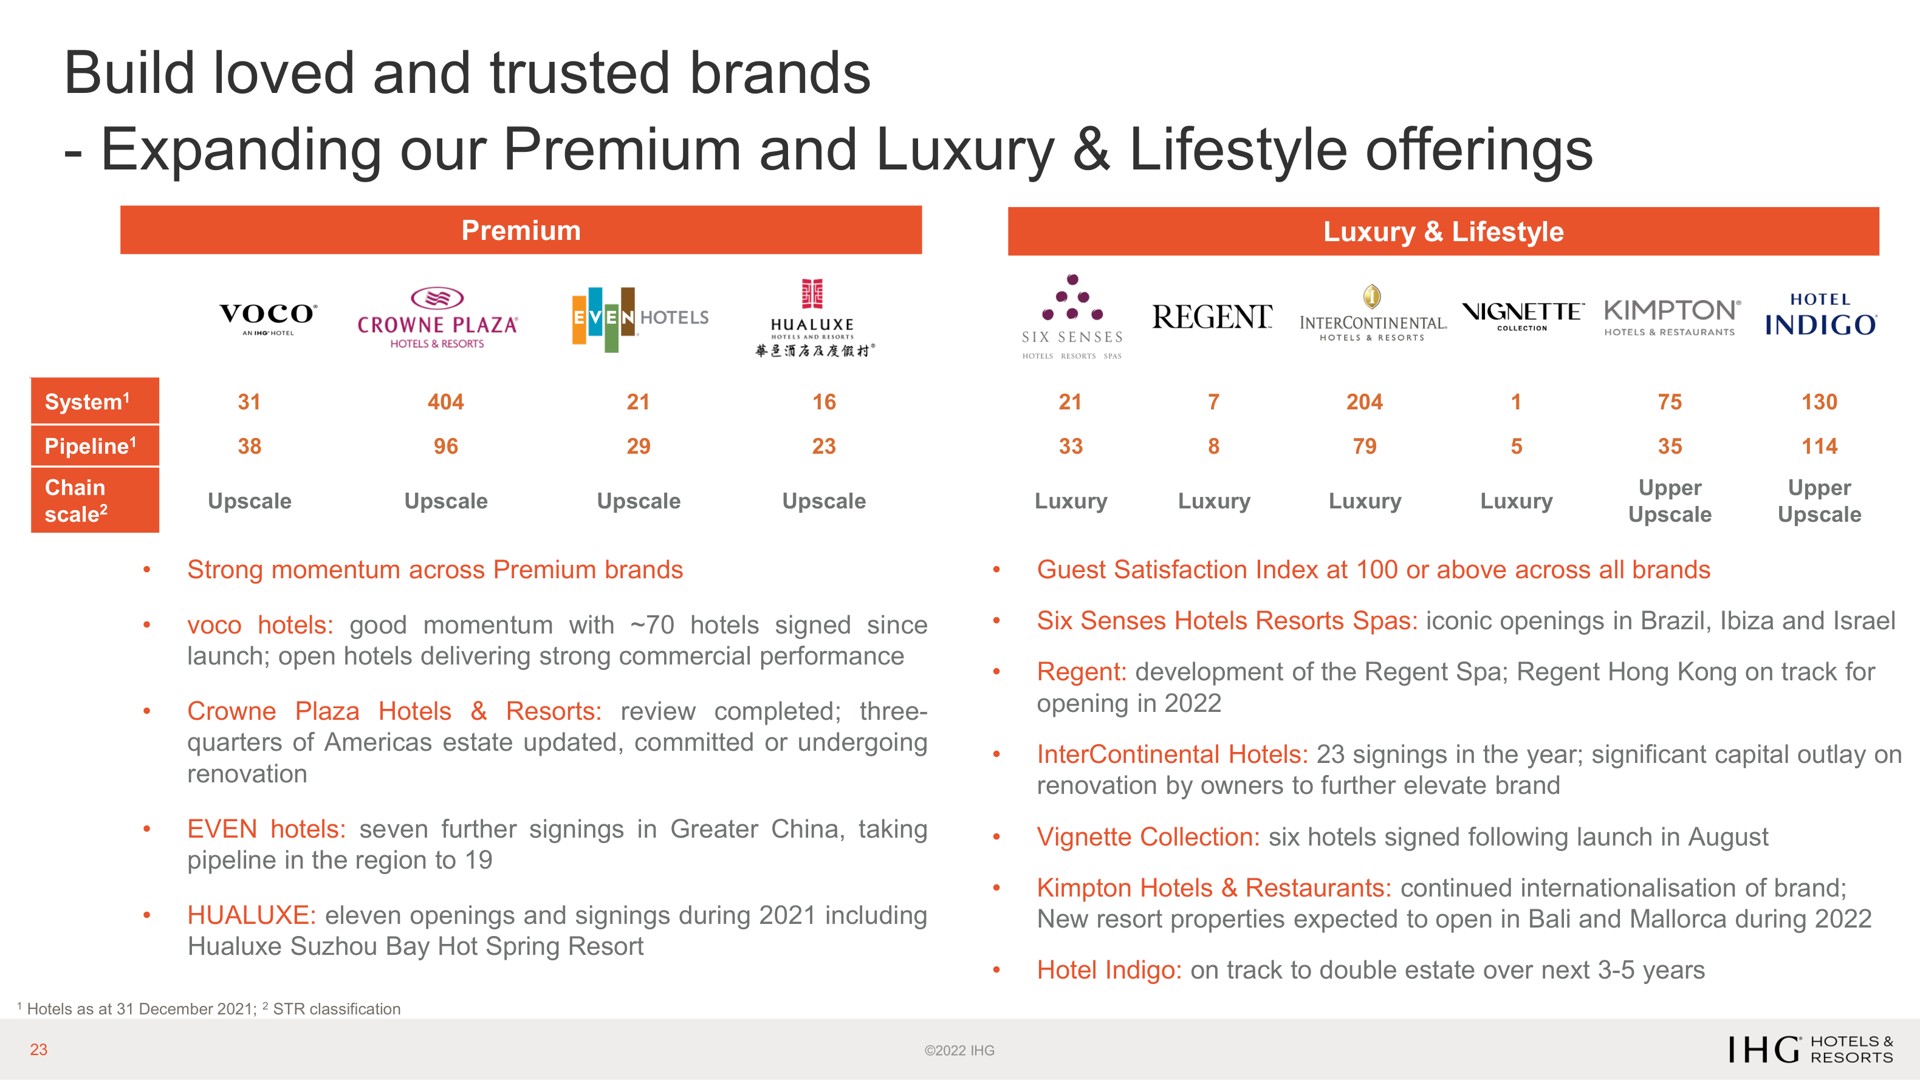 build loved and trusted brands expanding our premium and luxury offerings | IHG Hotels